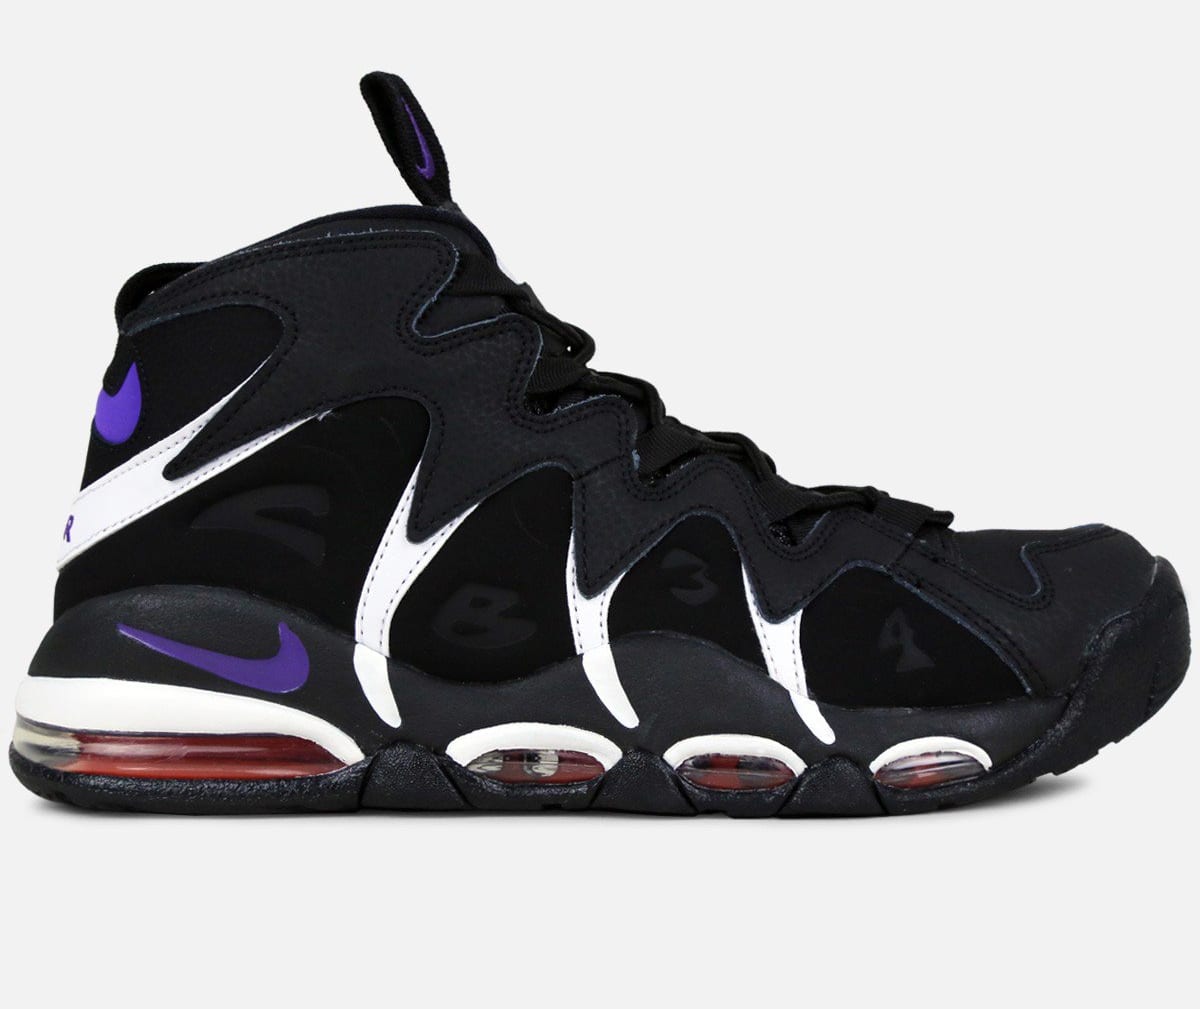 Nike Air Max CB34 - Sneaker Sales July 24,2017 | Sole Collector